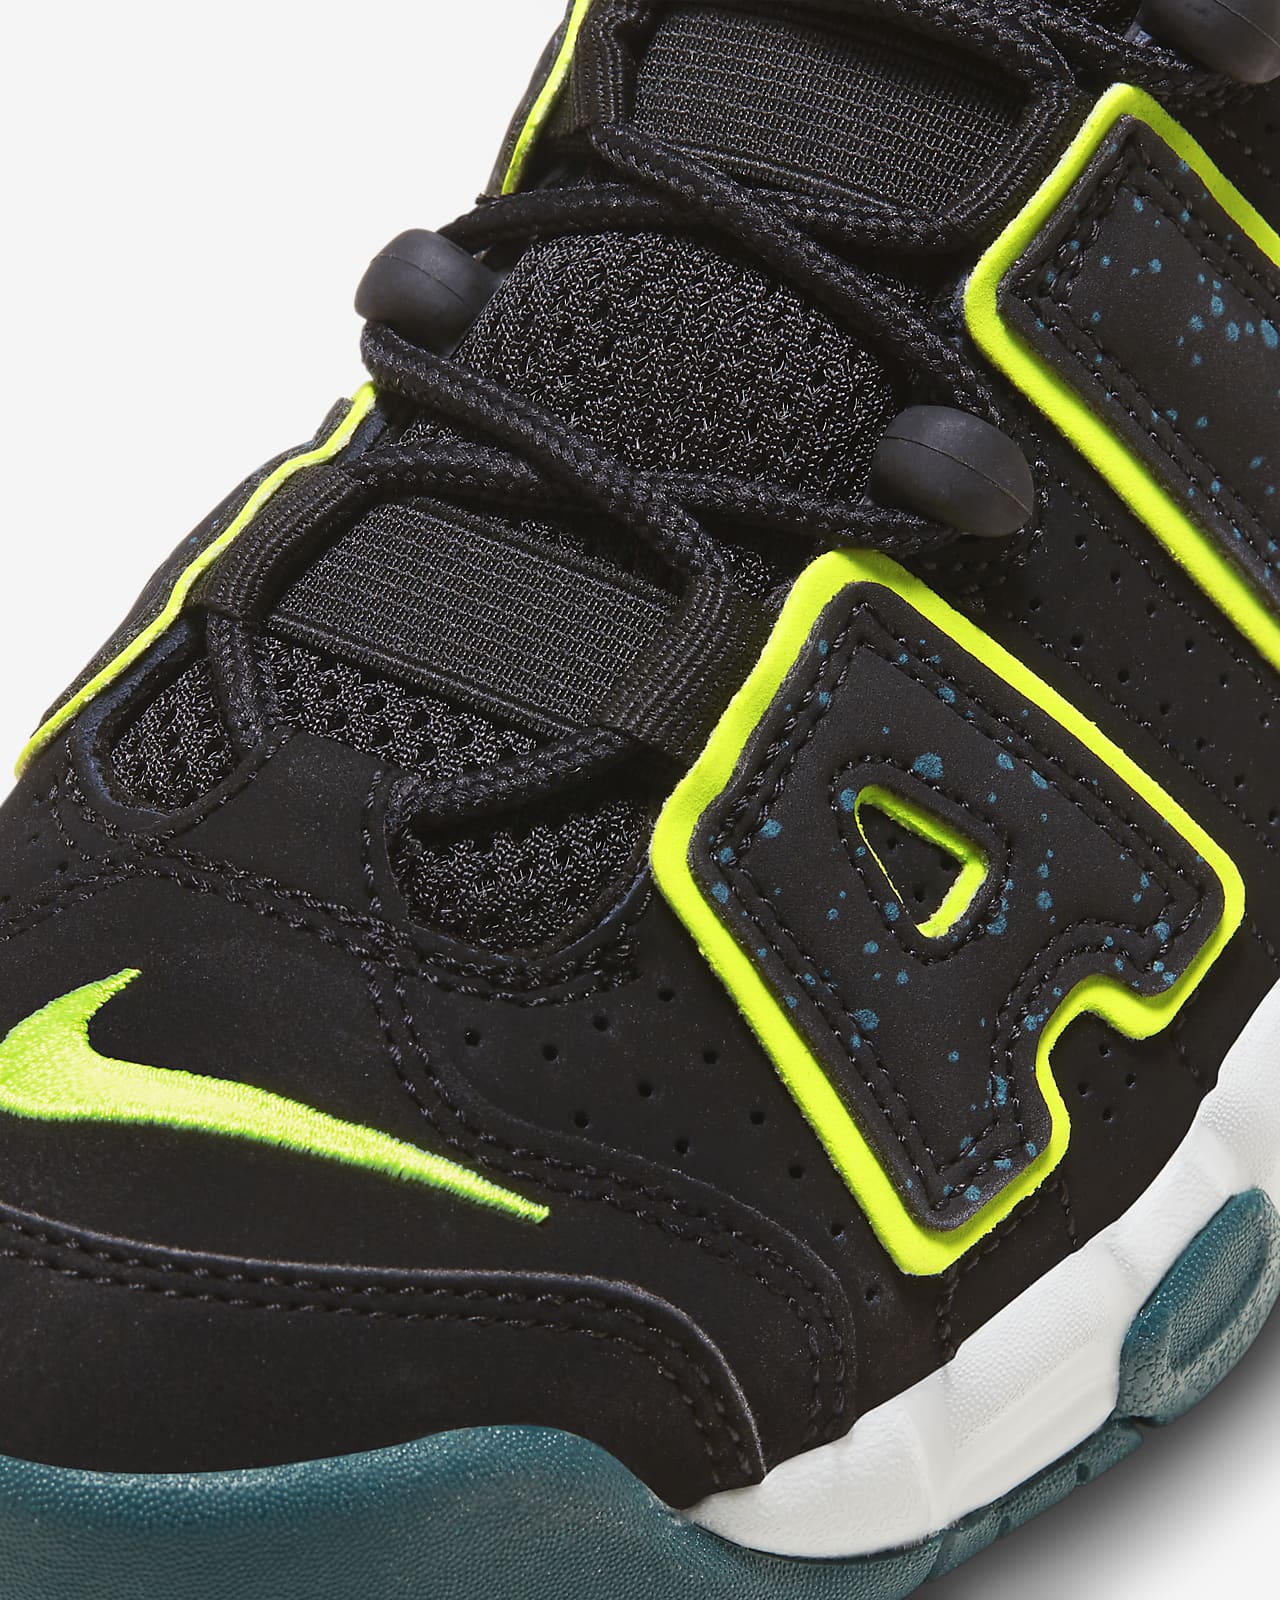 nike uptempo black and green